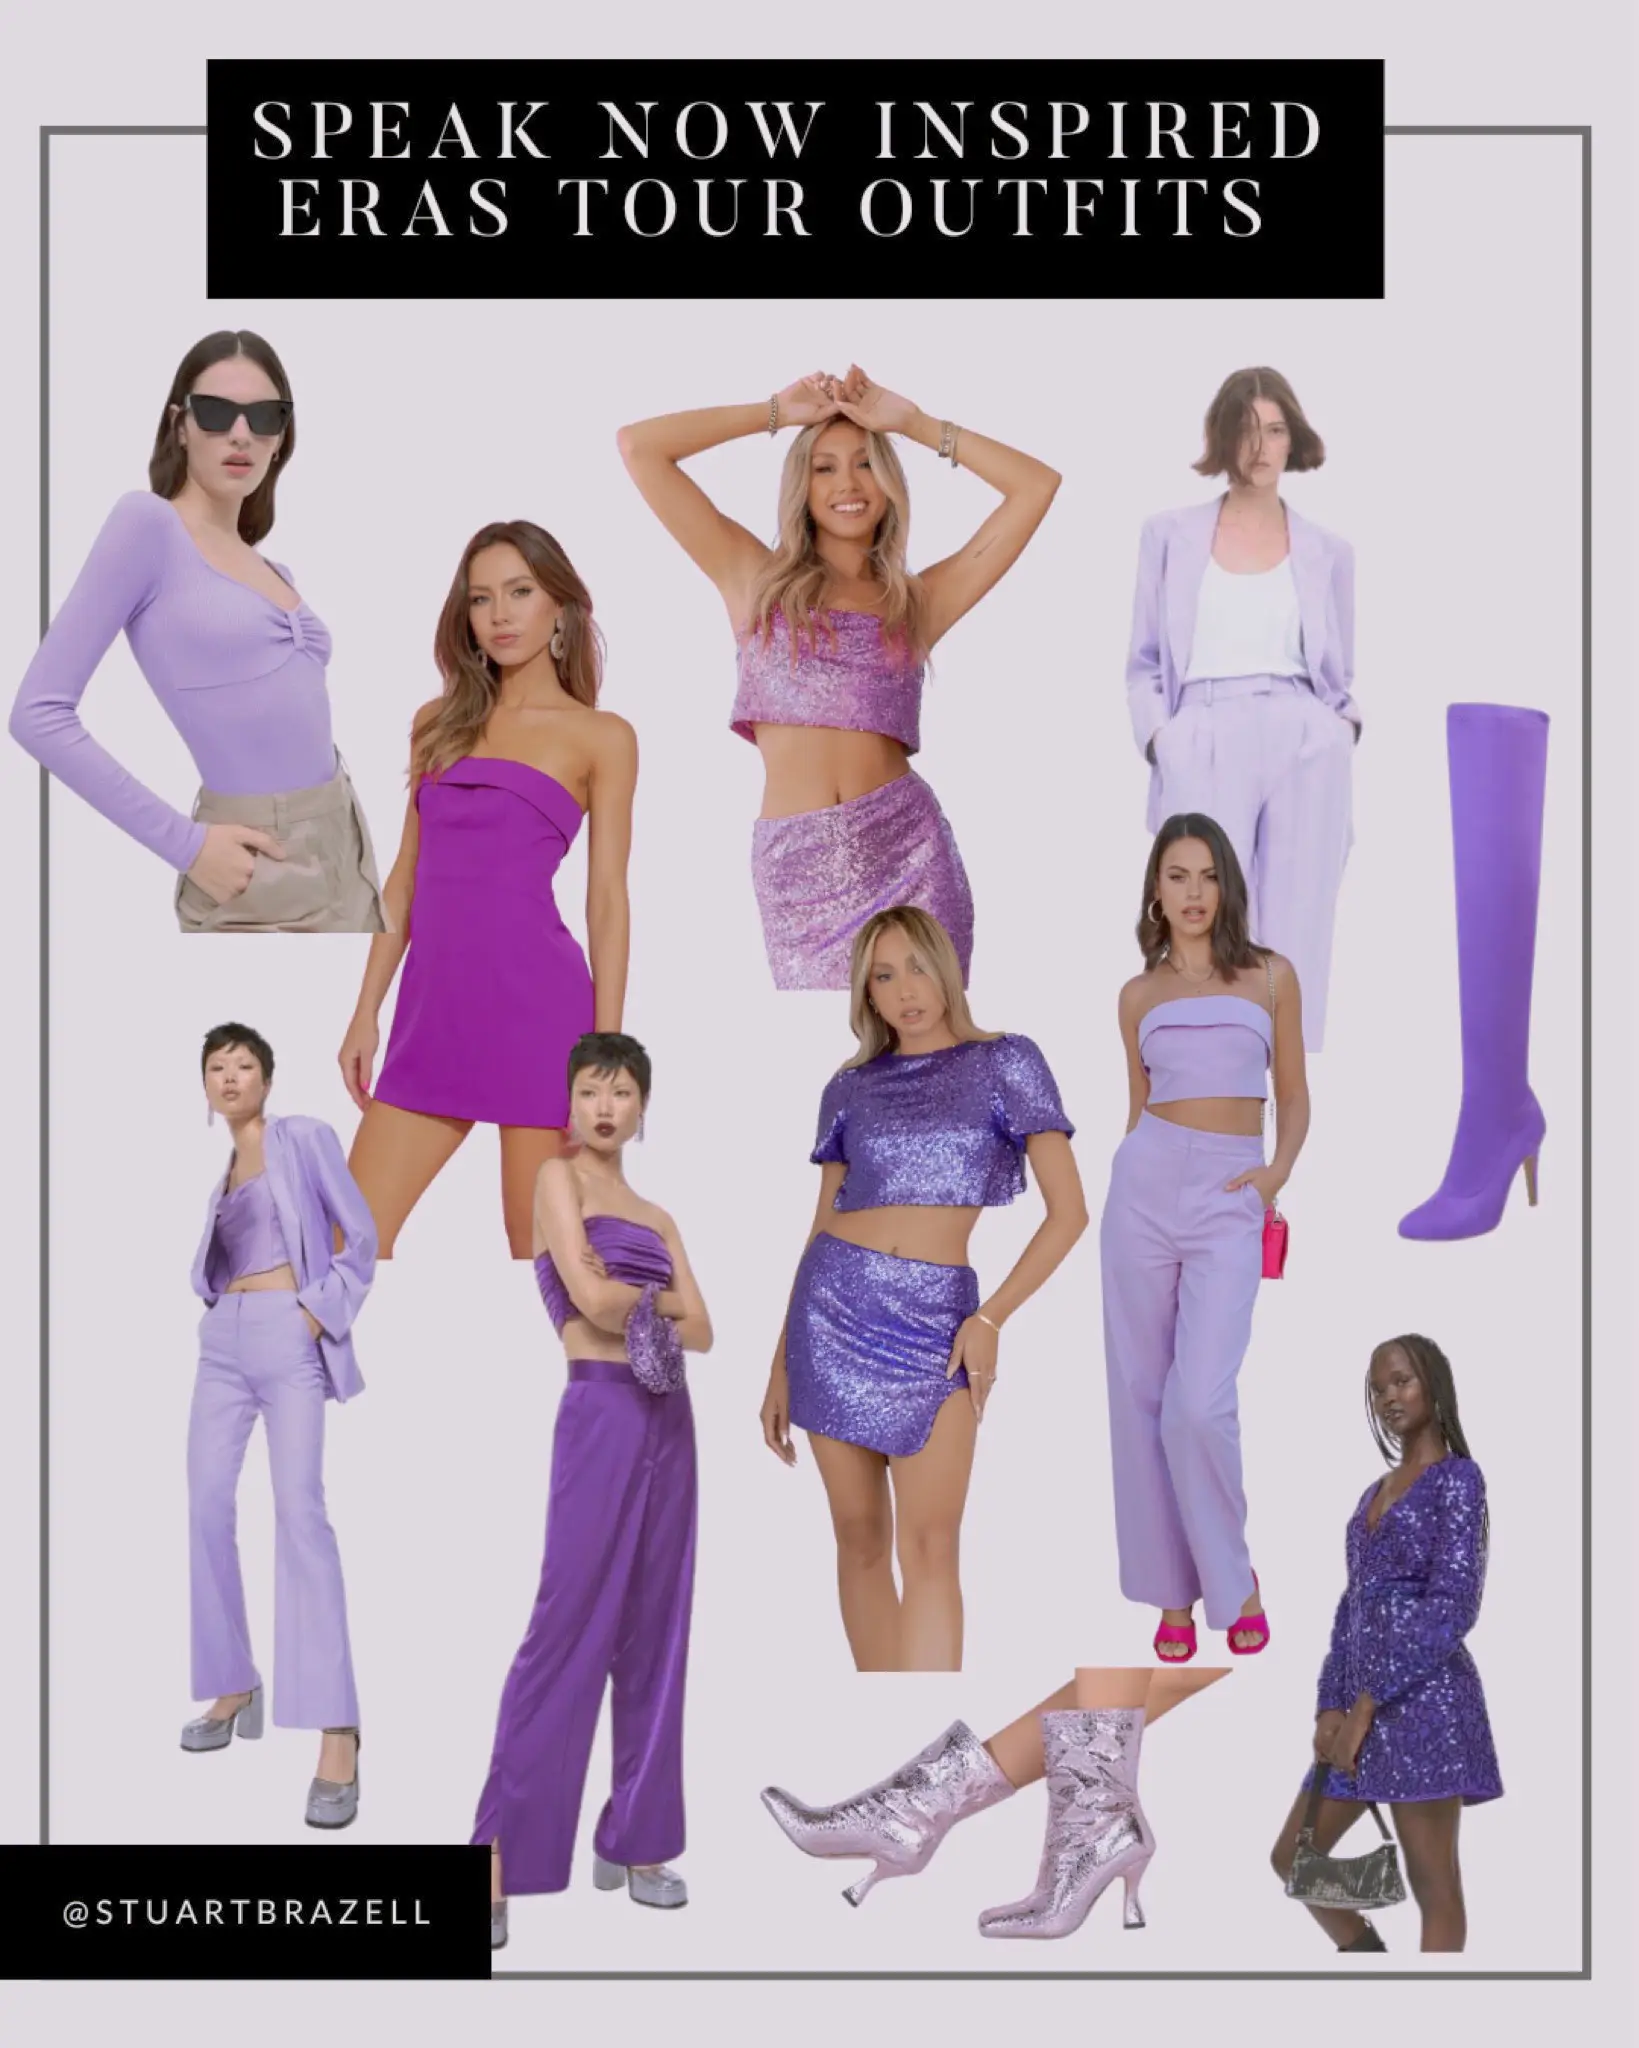 113 Taylor Swift Concert Outfit Ideas for the Eras Tour